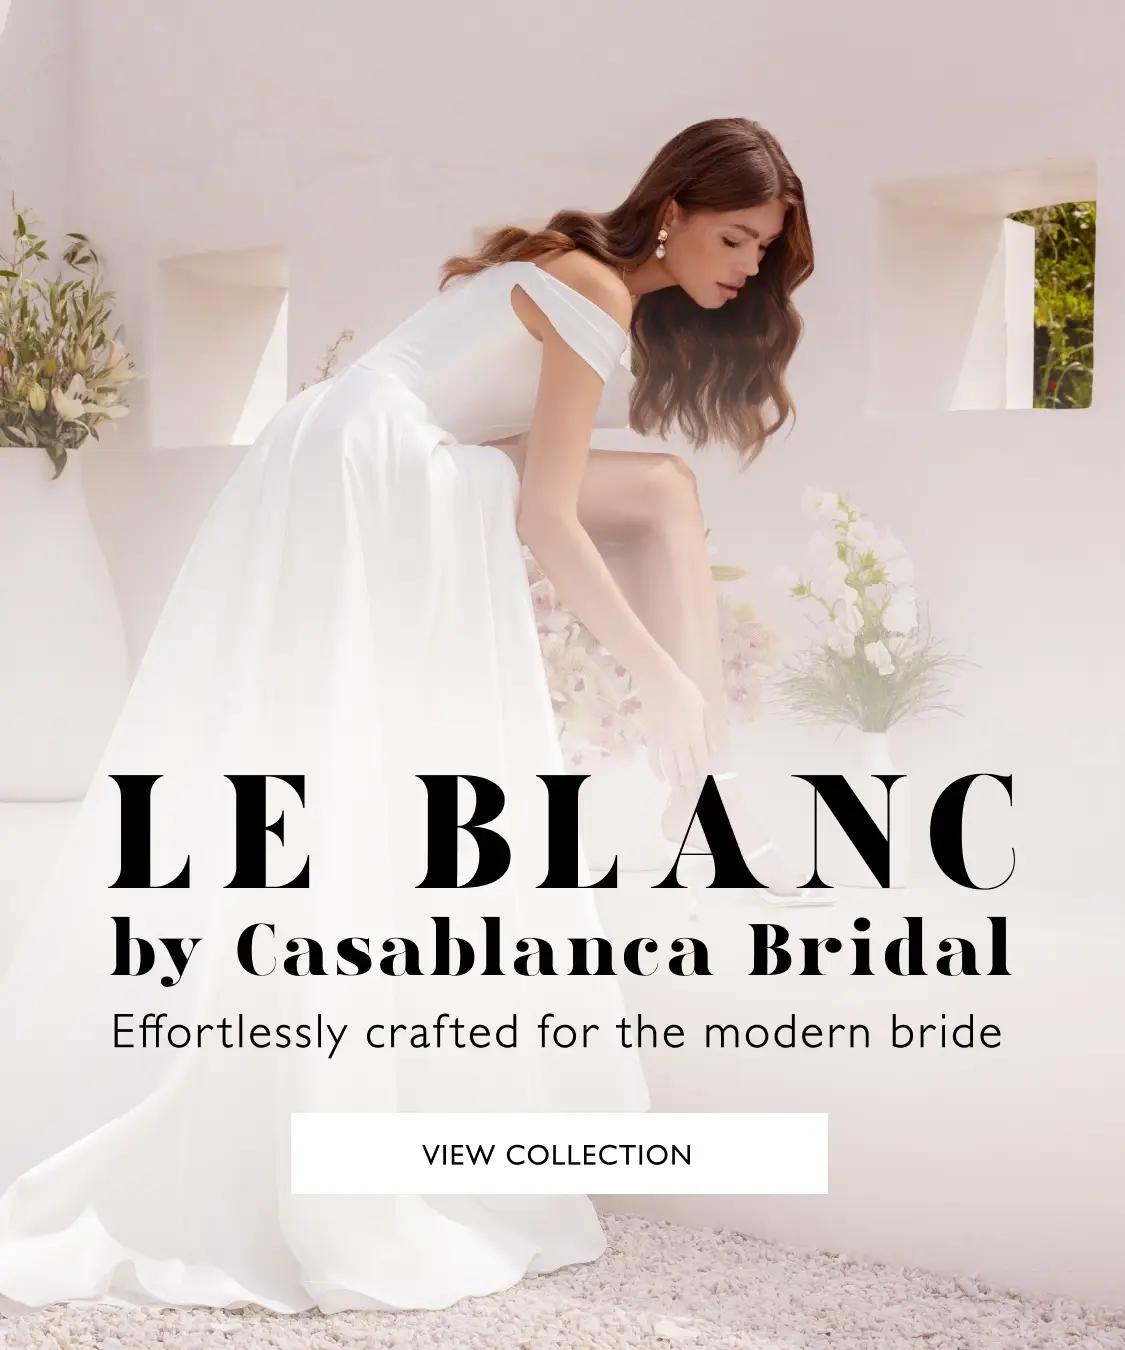 LE BLANC  BY CASABLANCA BRIDAL  Effortlessly crafted for the modern bride